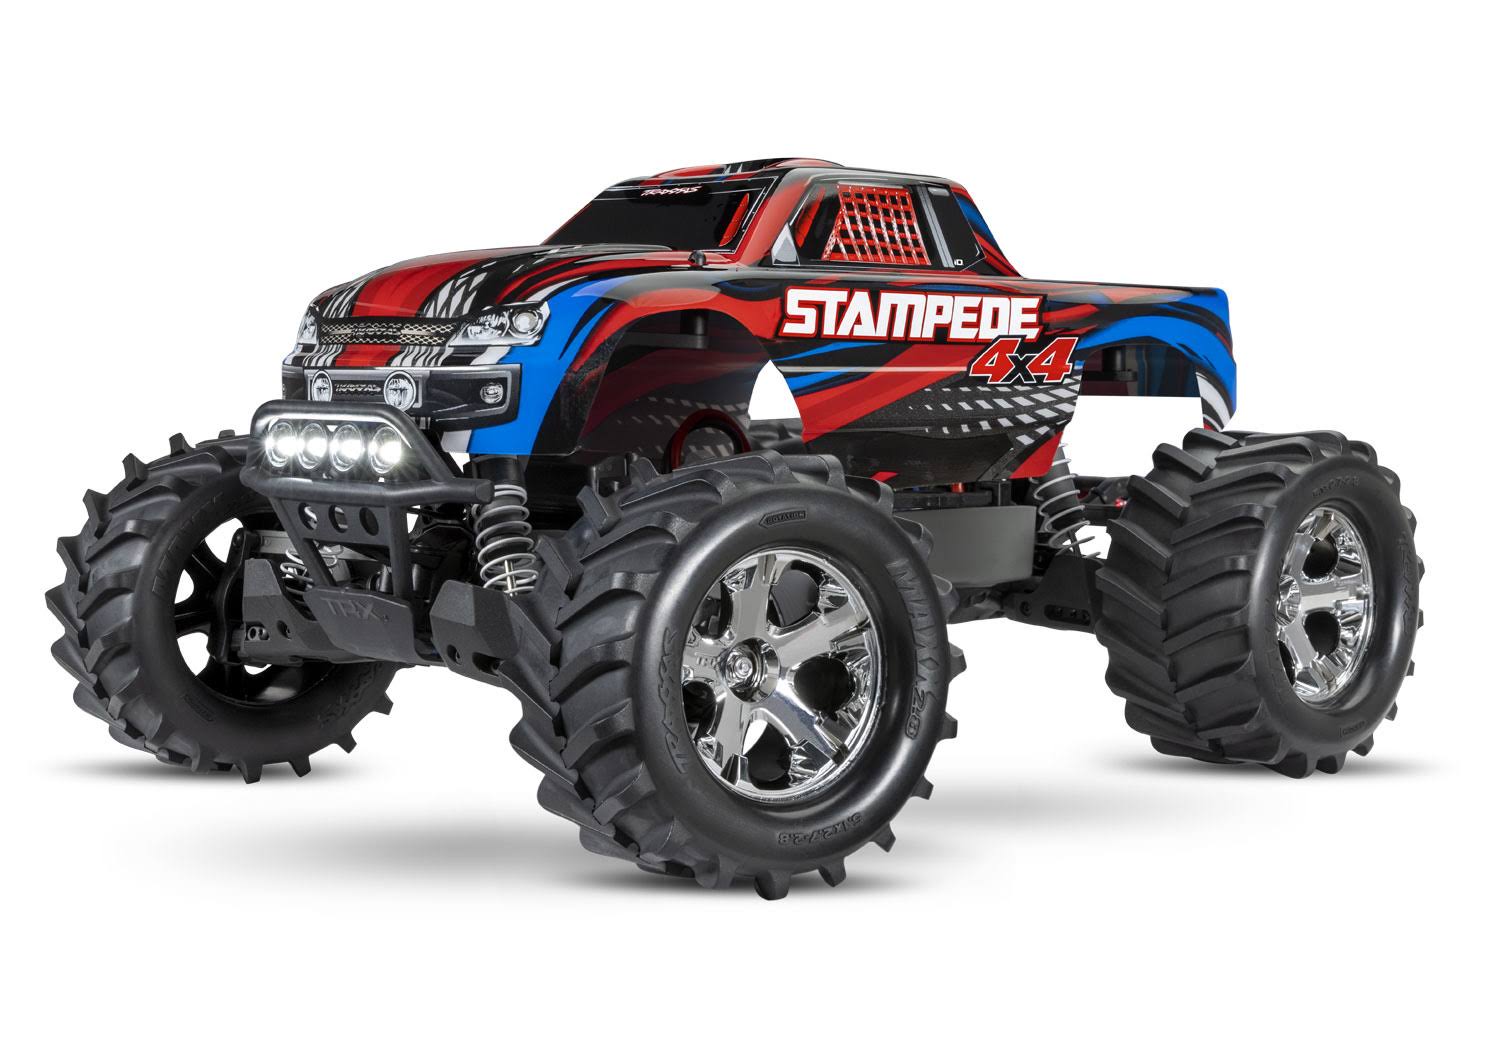 Traxxas 1/10 Stampede 4x4 Monster Truck with LED Lights - R